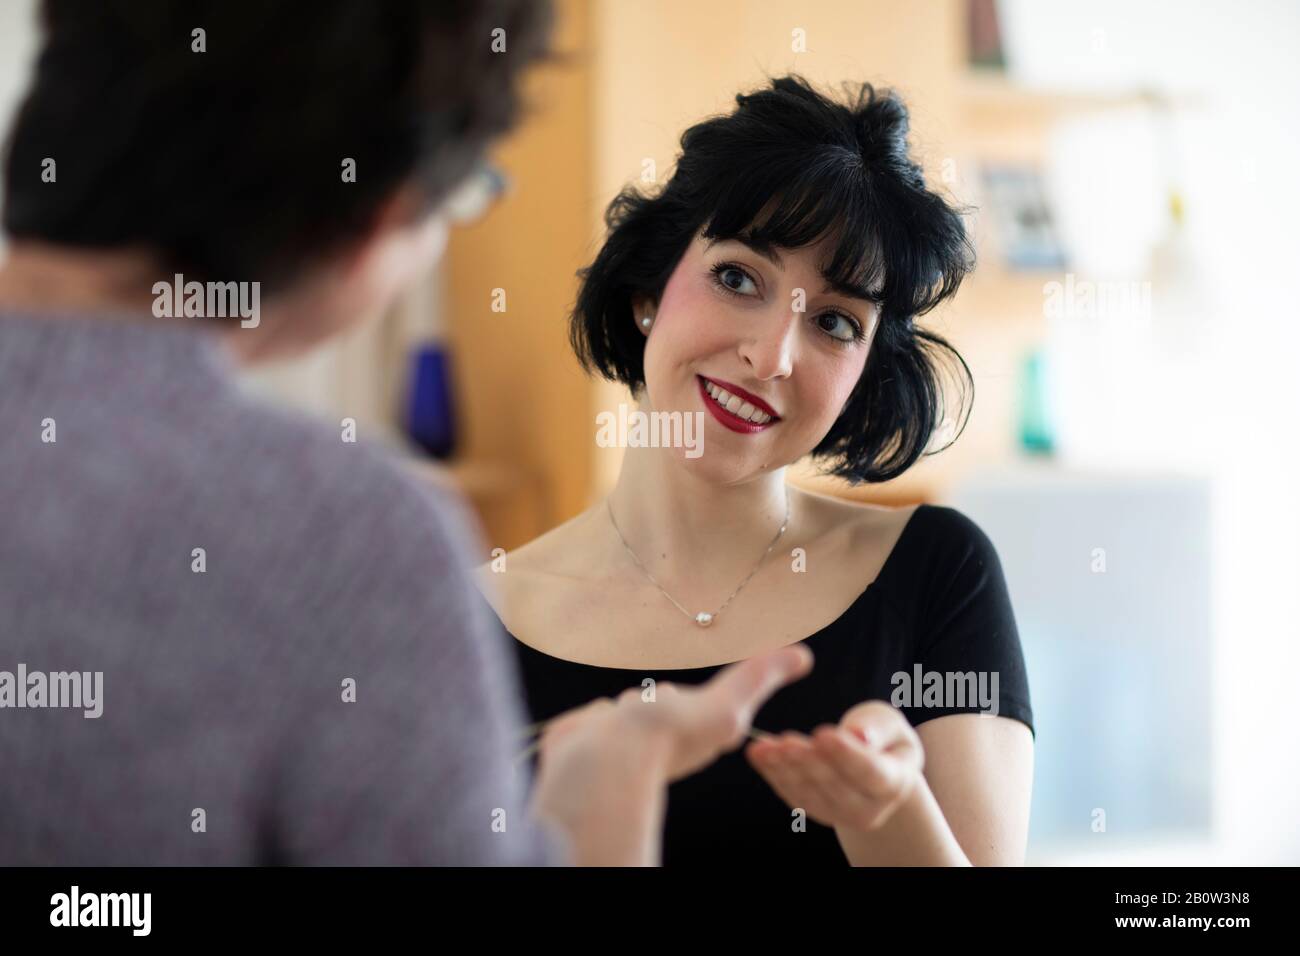 Smiling woman with black hair sitting at table, talking to a friend. Stock Photo